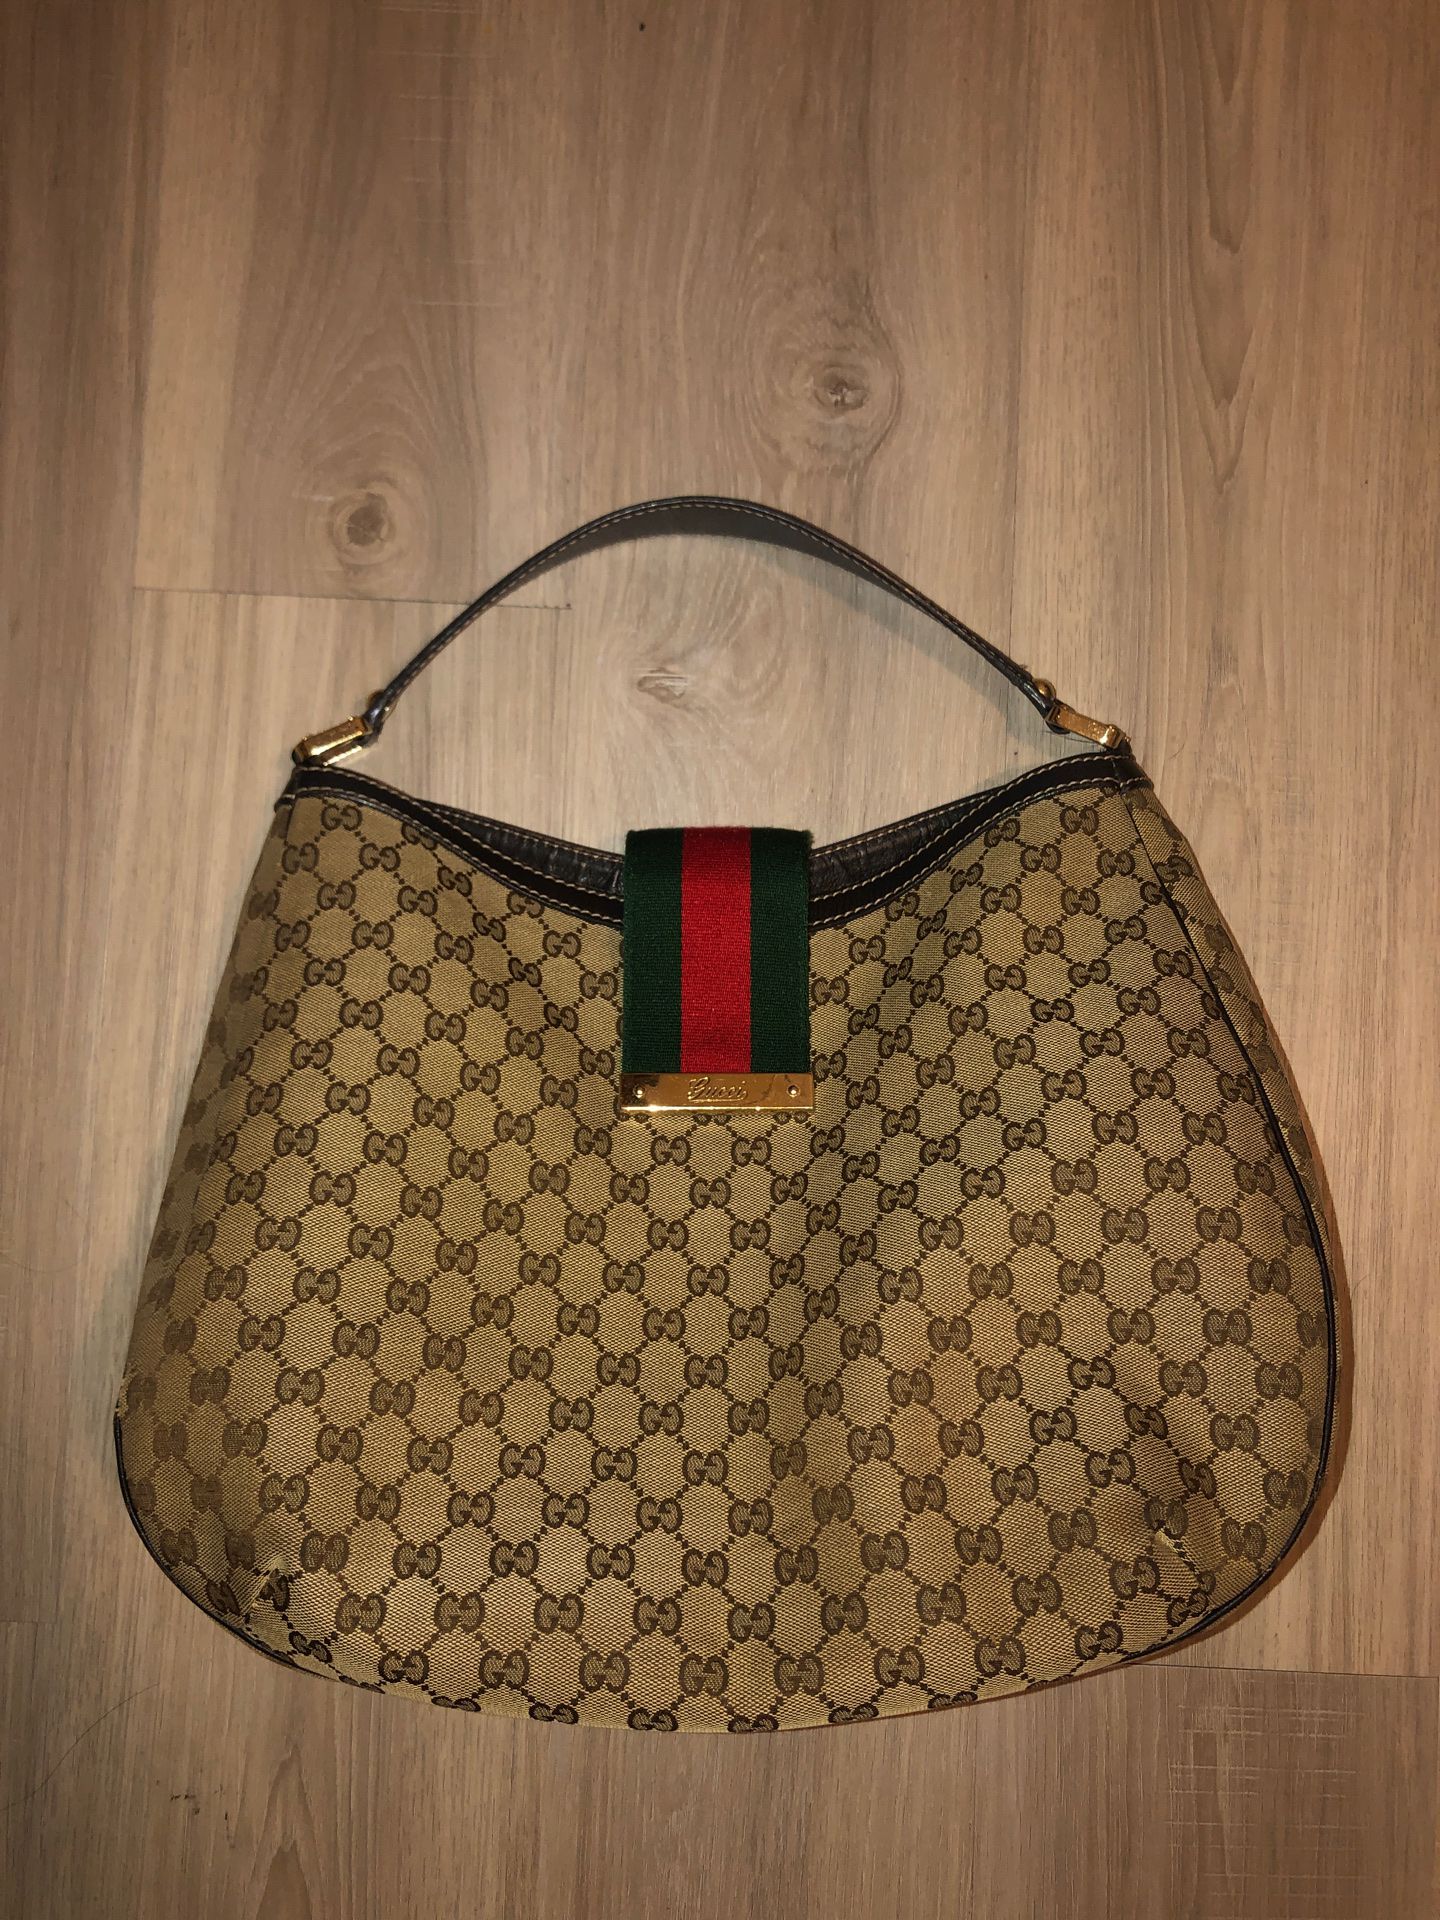 Authentic Gucci Hobo Bag